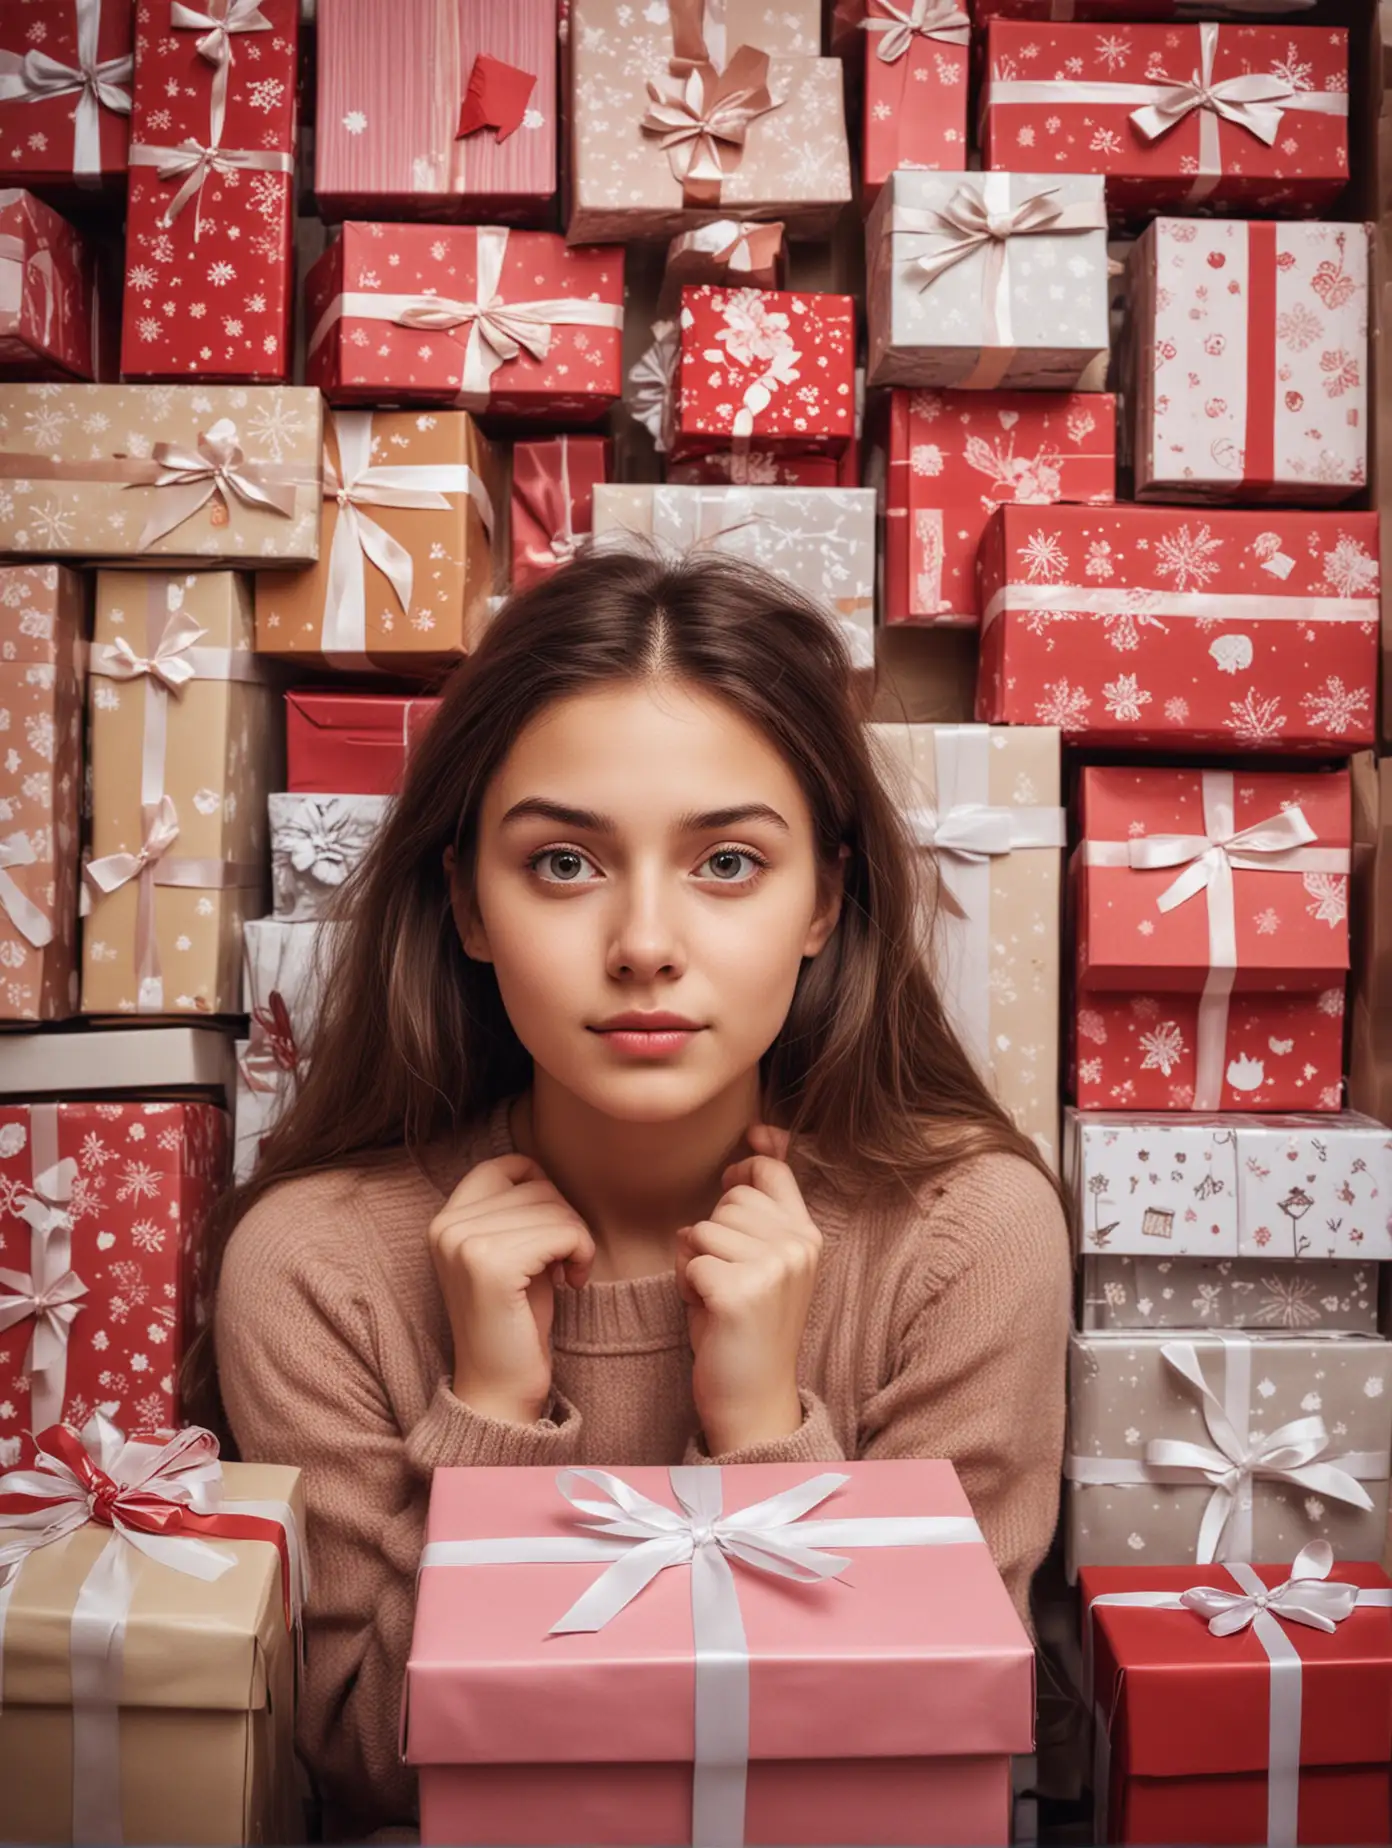 Contemplative Girl Surrounded by Gift Boxes